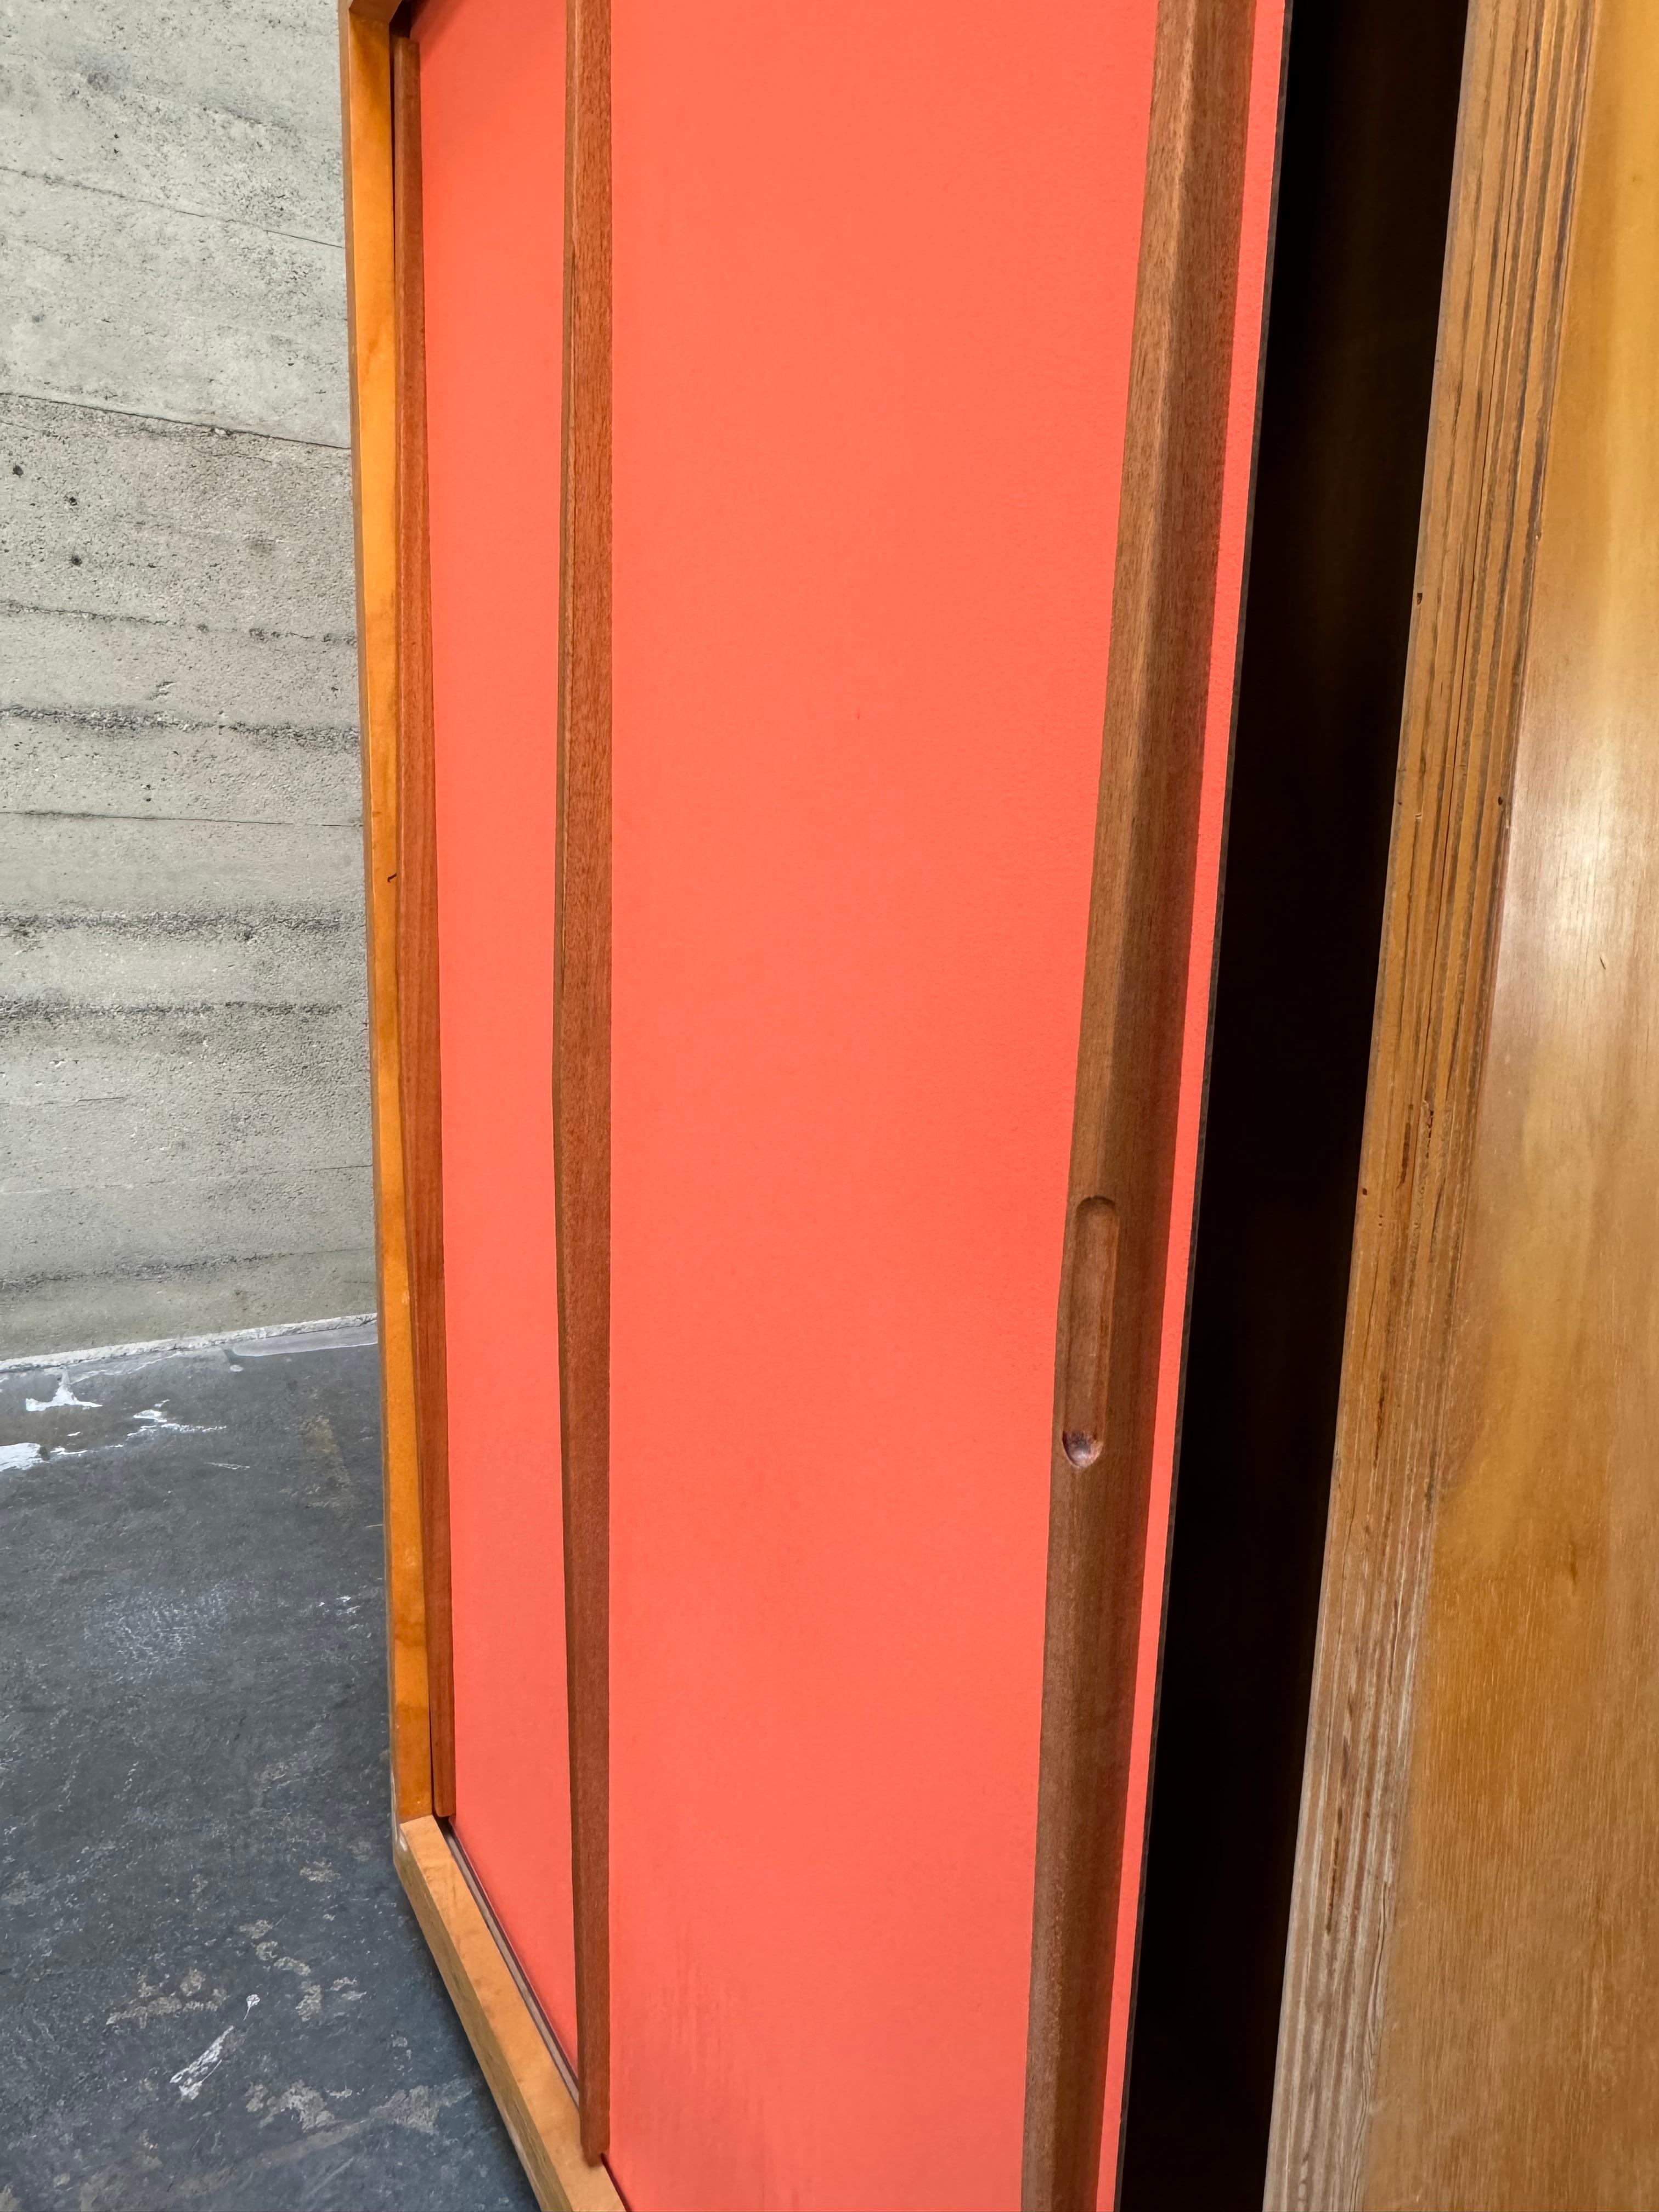 American Jean Prouve Style Cabinet with Sliding Doors #2 For Sale